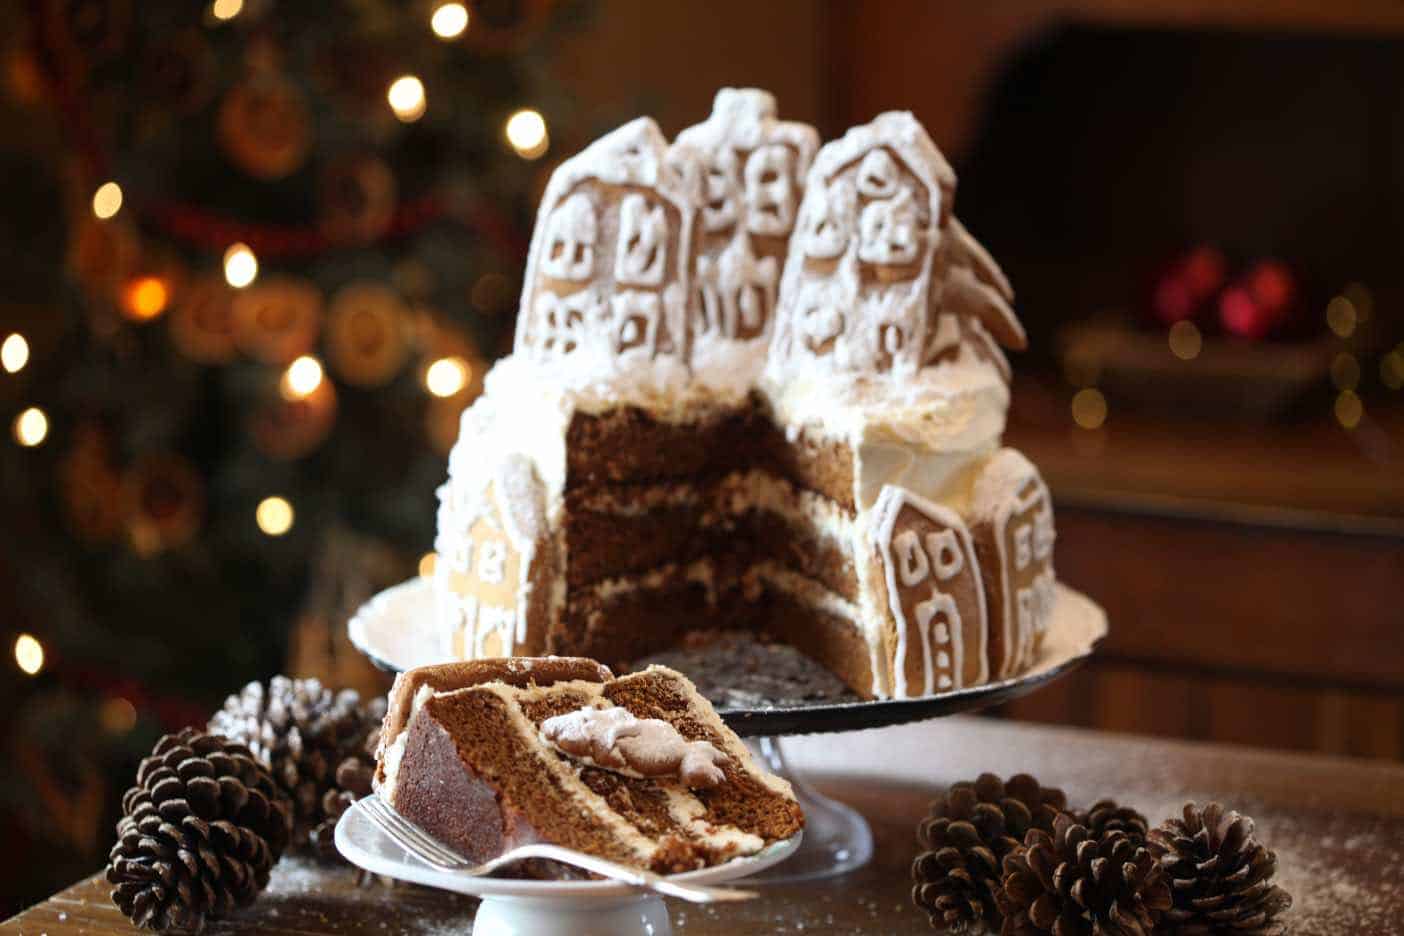 How To Make Gingerbread Cake With Cream Cheese Frosting